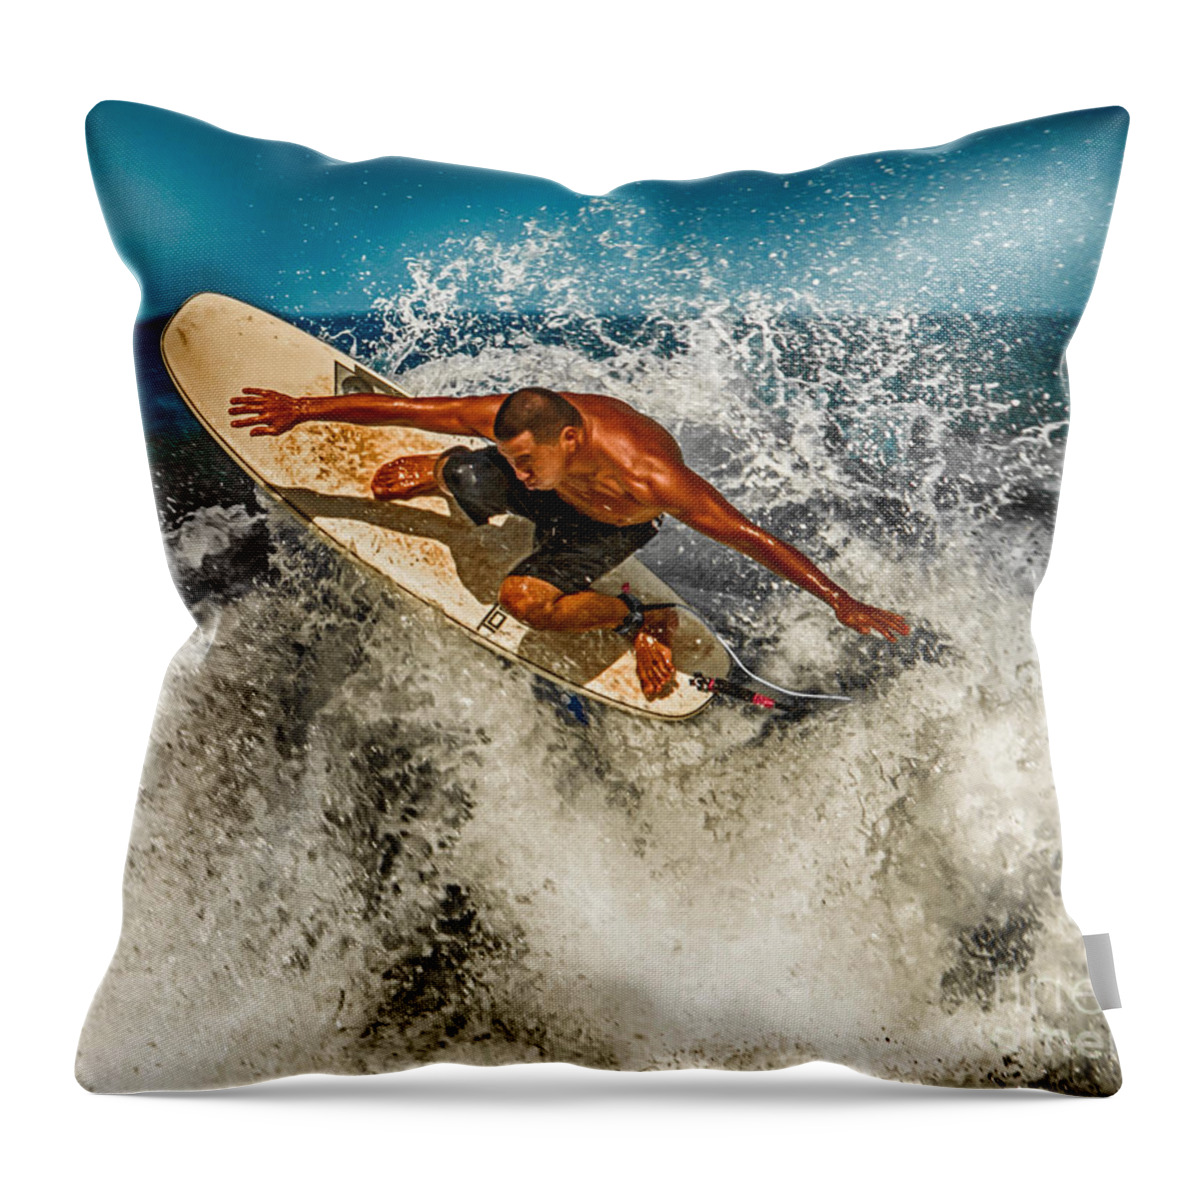 Beach Throw Pillow featuring the photograph Stuck On It by Eye Olating Images